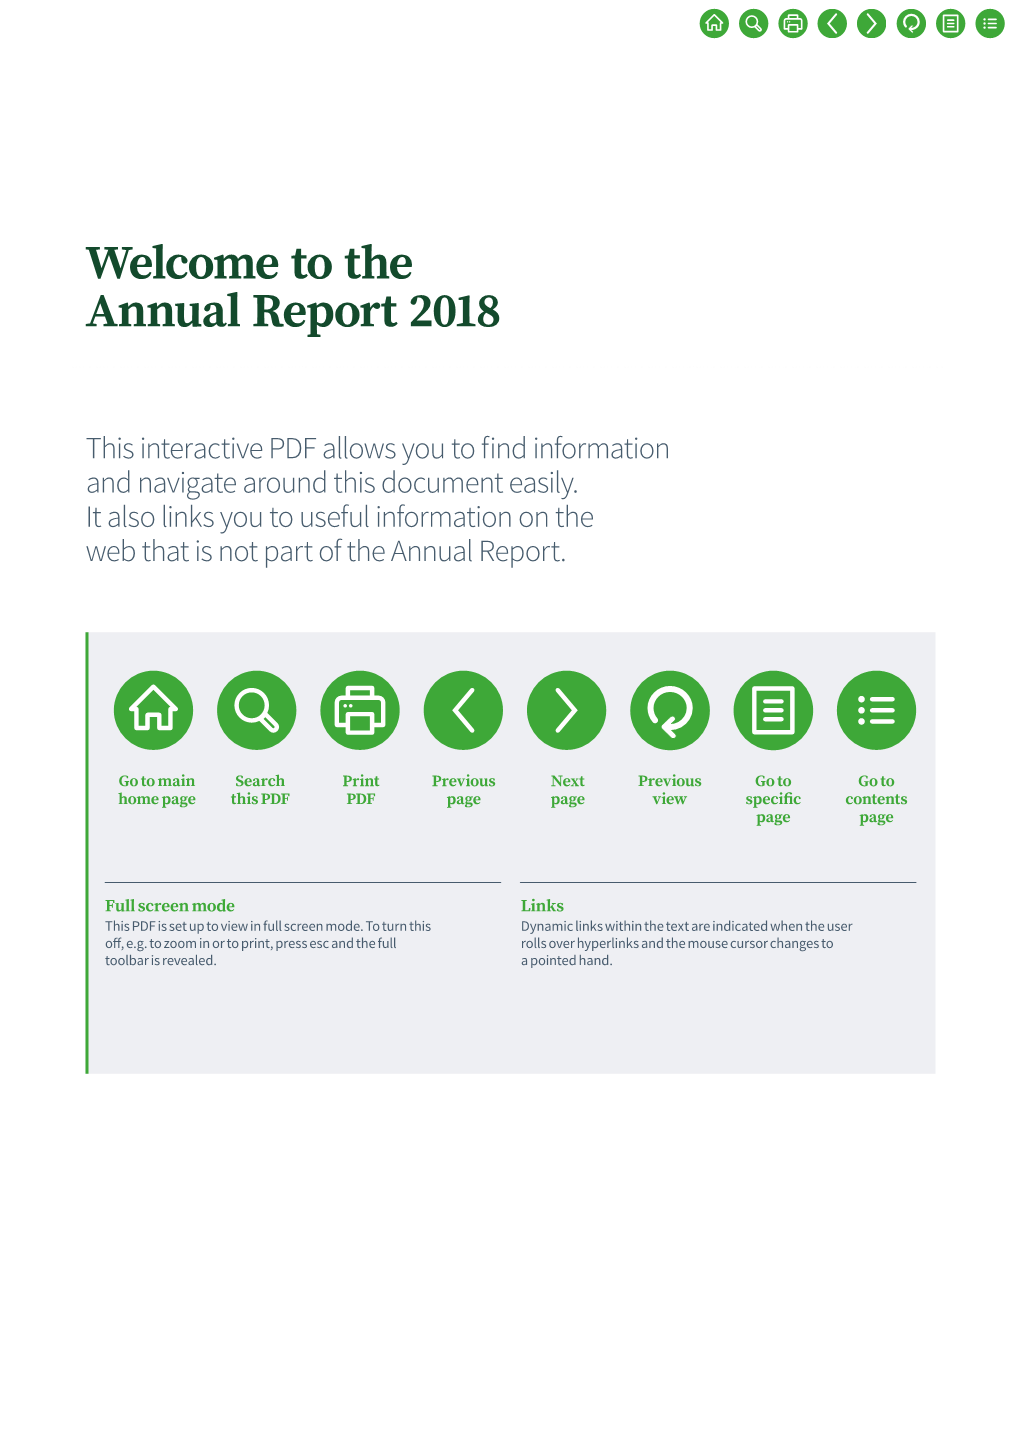 The Annual Report 2018